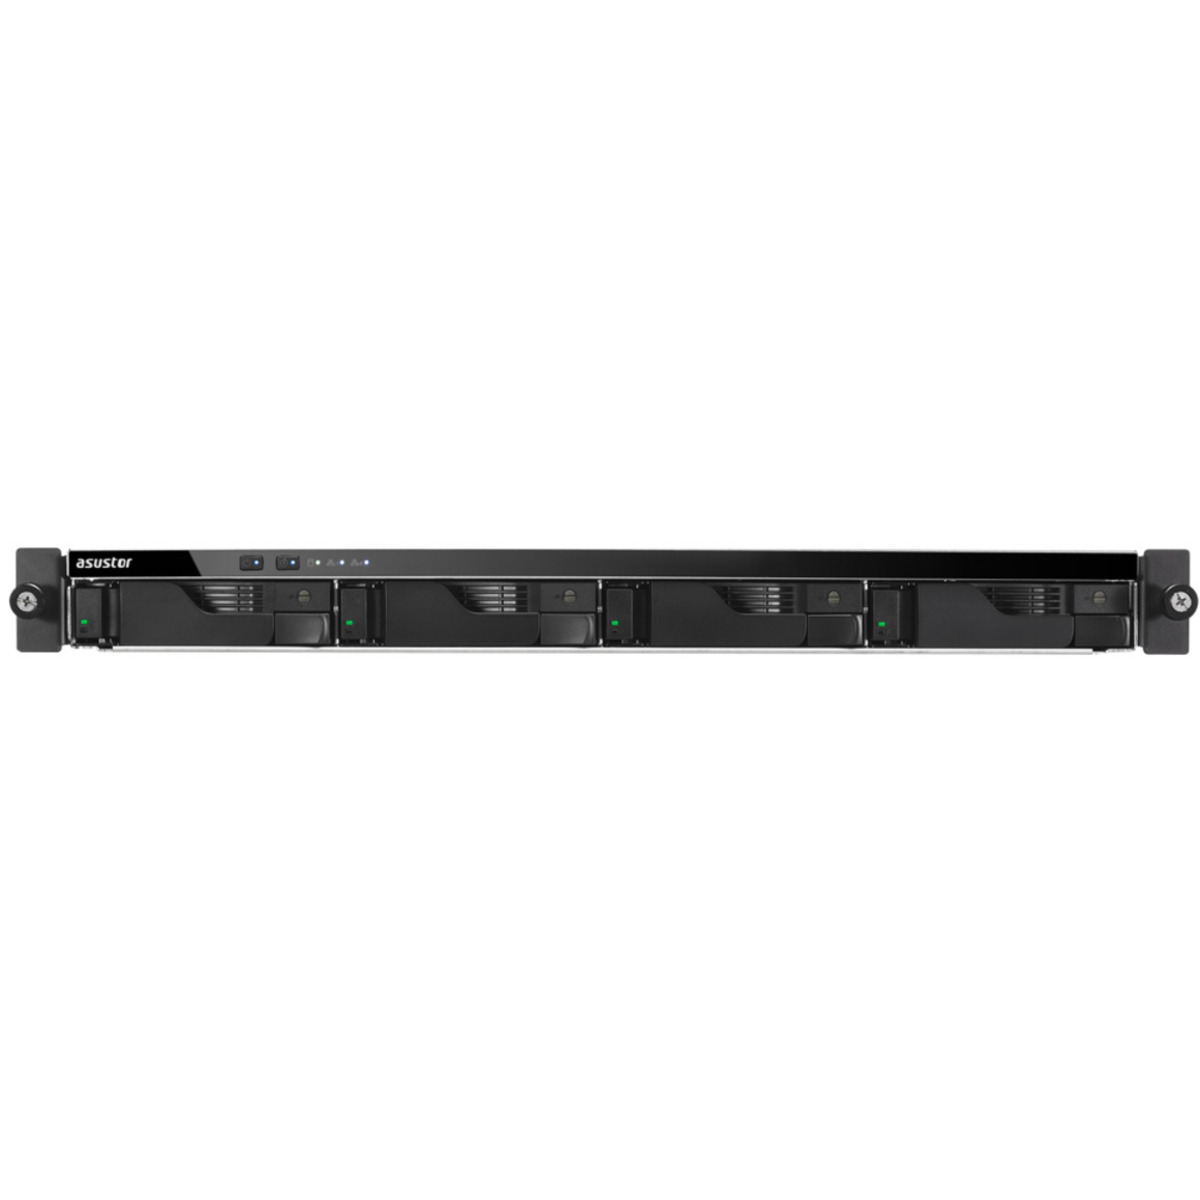 ASUSTOR LOCKERSTOR 4RD AS6504RD 28tb 4-Bay RackMount Multimedia / Power User / Business NAS - Network Attached Storage Device 2x14tb Western Digital Red Pro WD142KFGX 3.5 7200rpm SATA 6Gb/s HDD NAS Class Drives Installed - Burn-In Tested - FREE RAM UPGRADE LOCKERSTOR 4RD AS6504RD